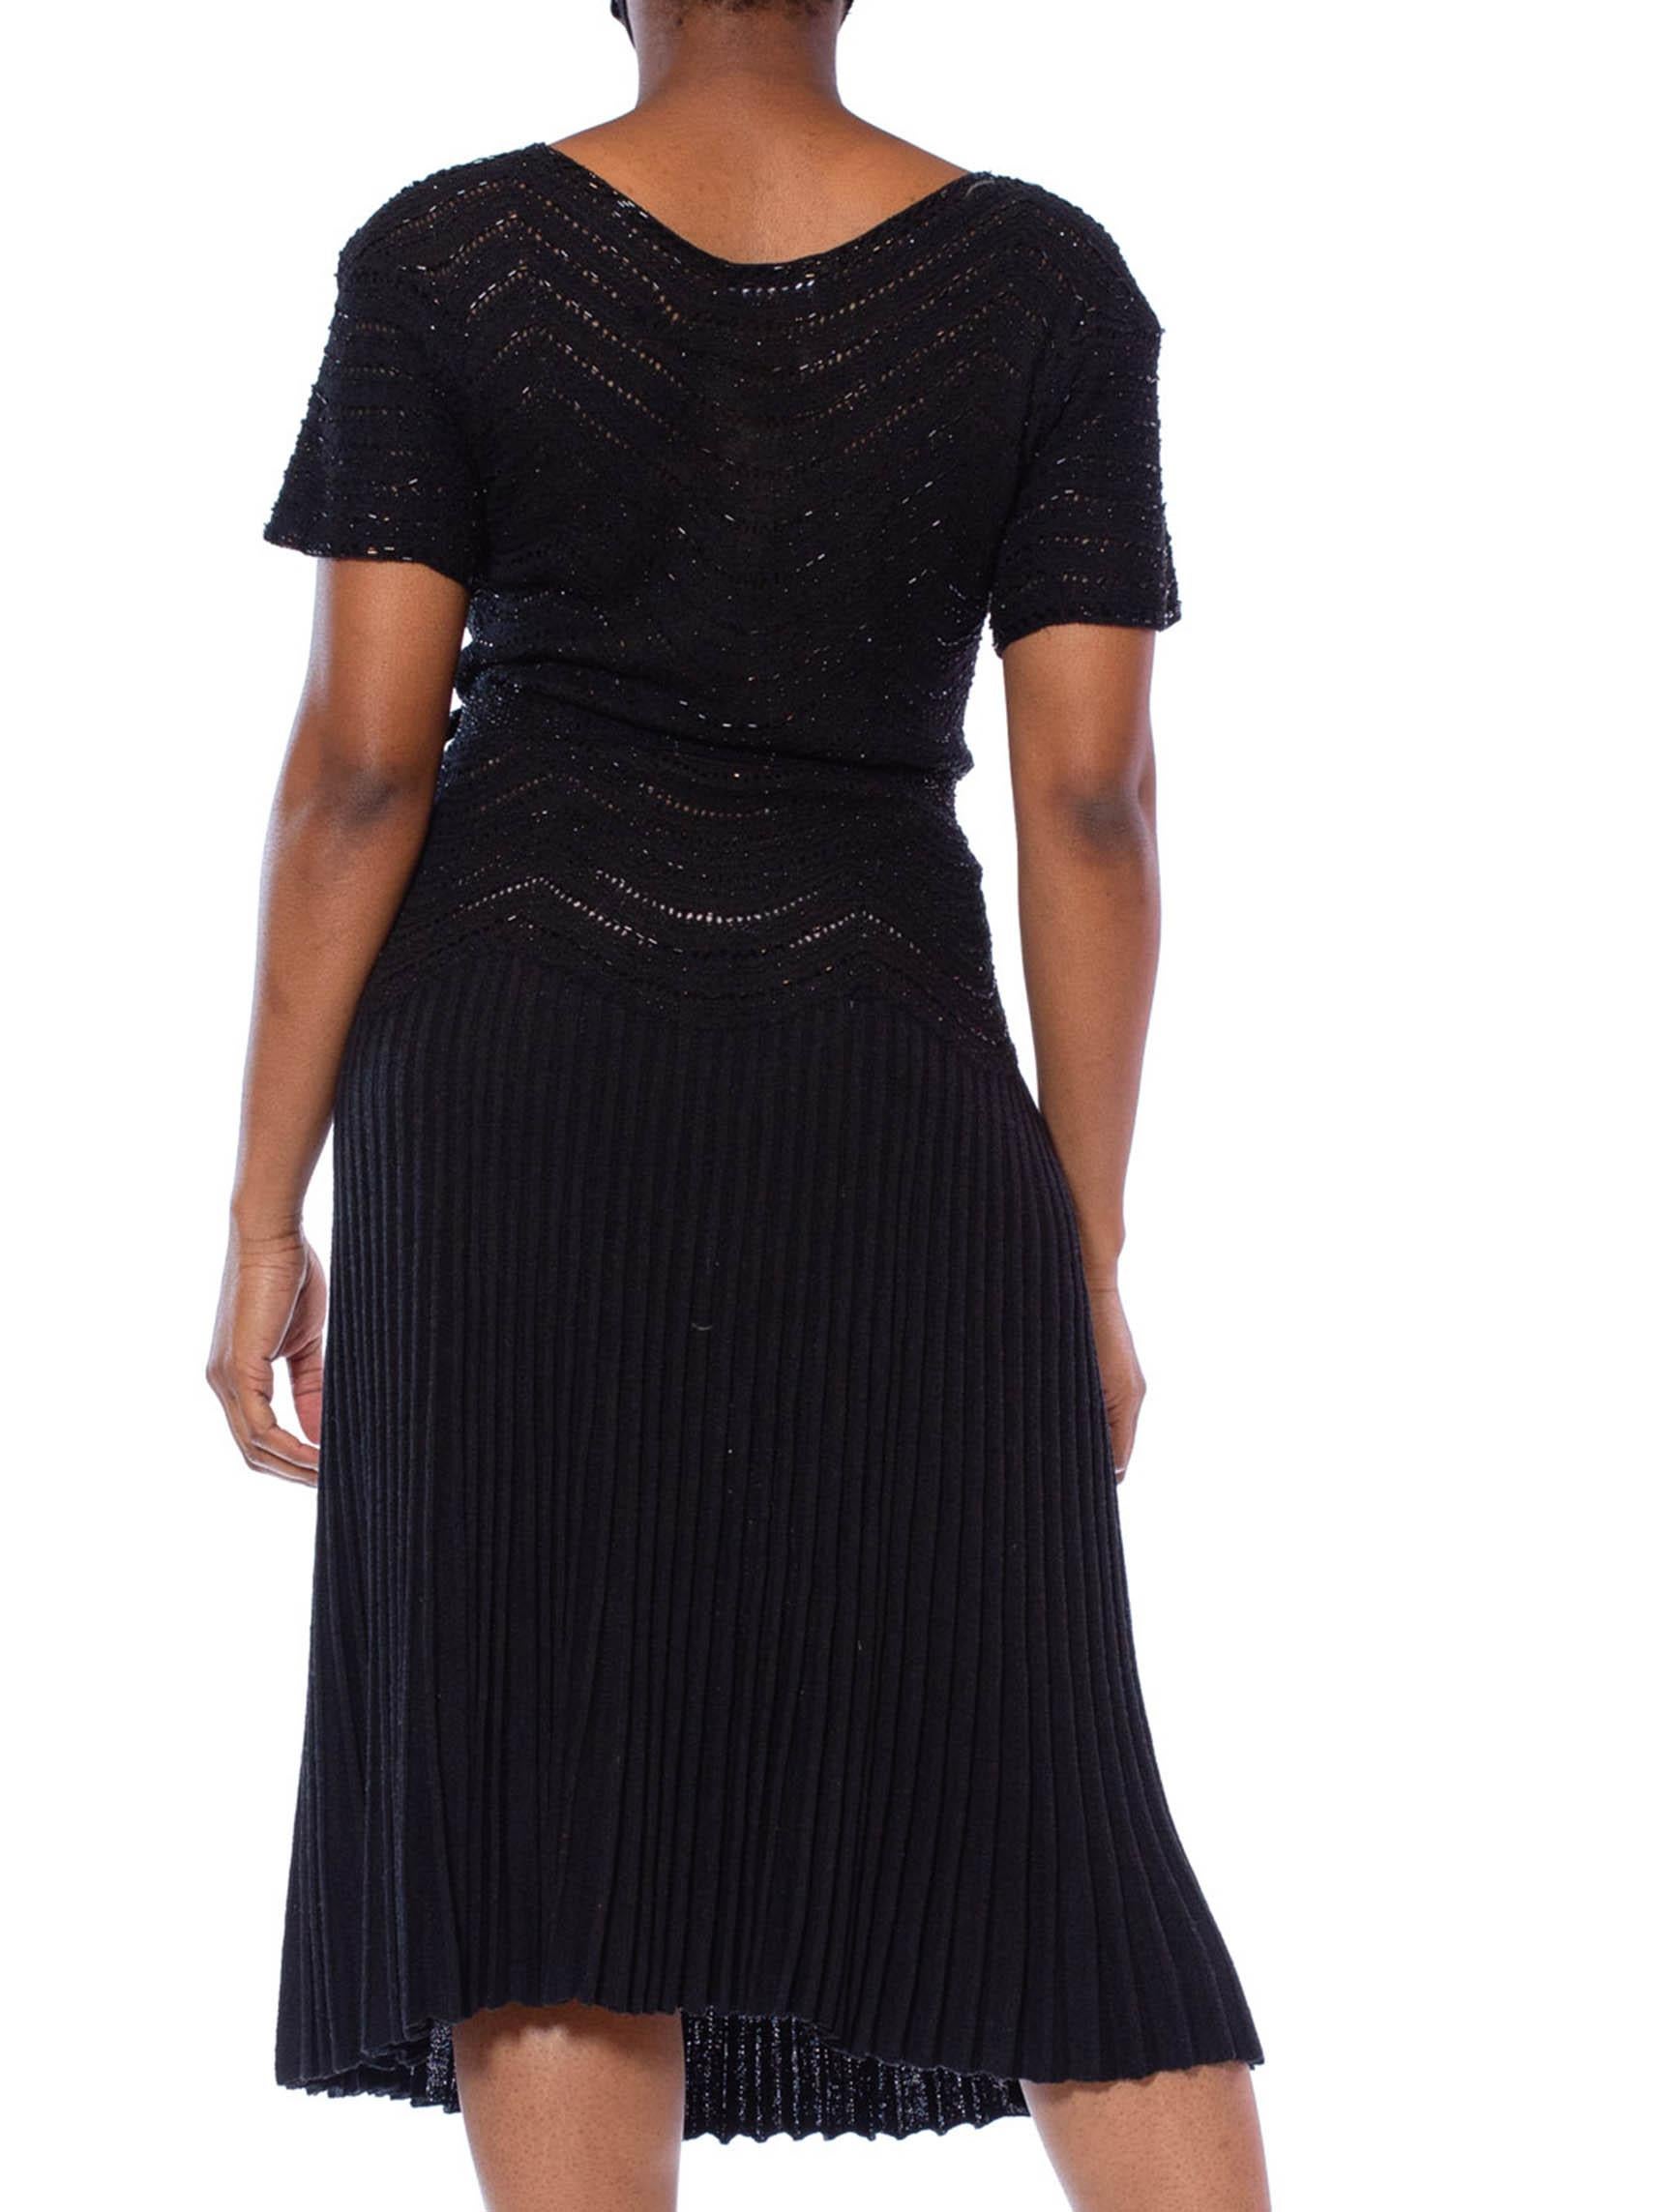 1950S Black Beaded Rayon Knit Wiggle Dress For Sale 5